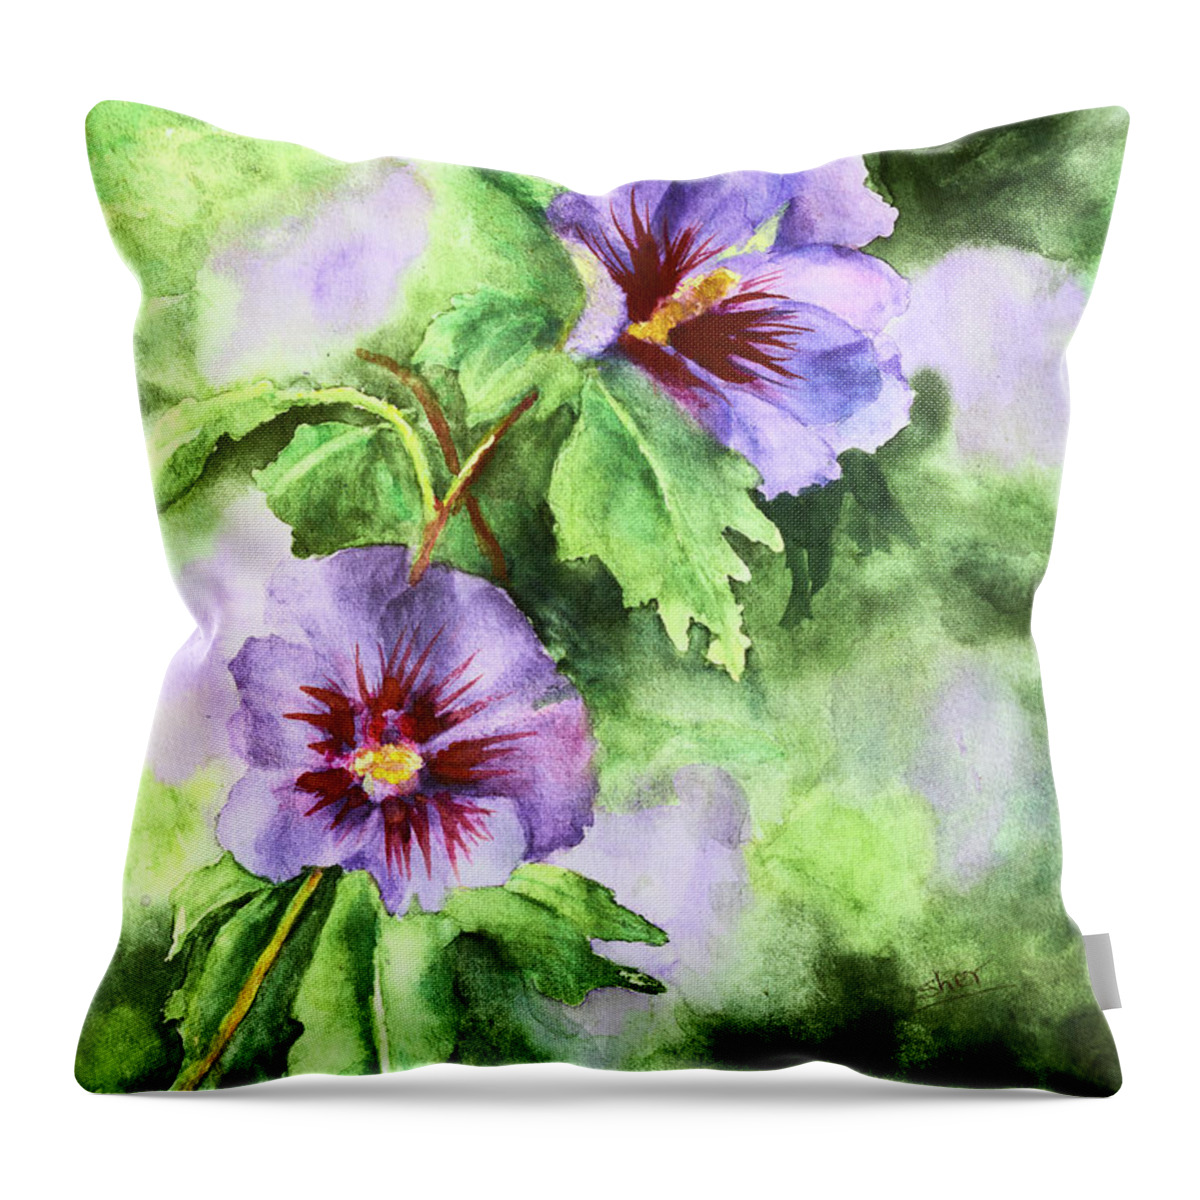 Art - Watercolor Throw Pillow featuring the painting Summer Glory Watercolour on Paper by Sher Nasser